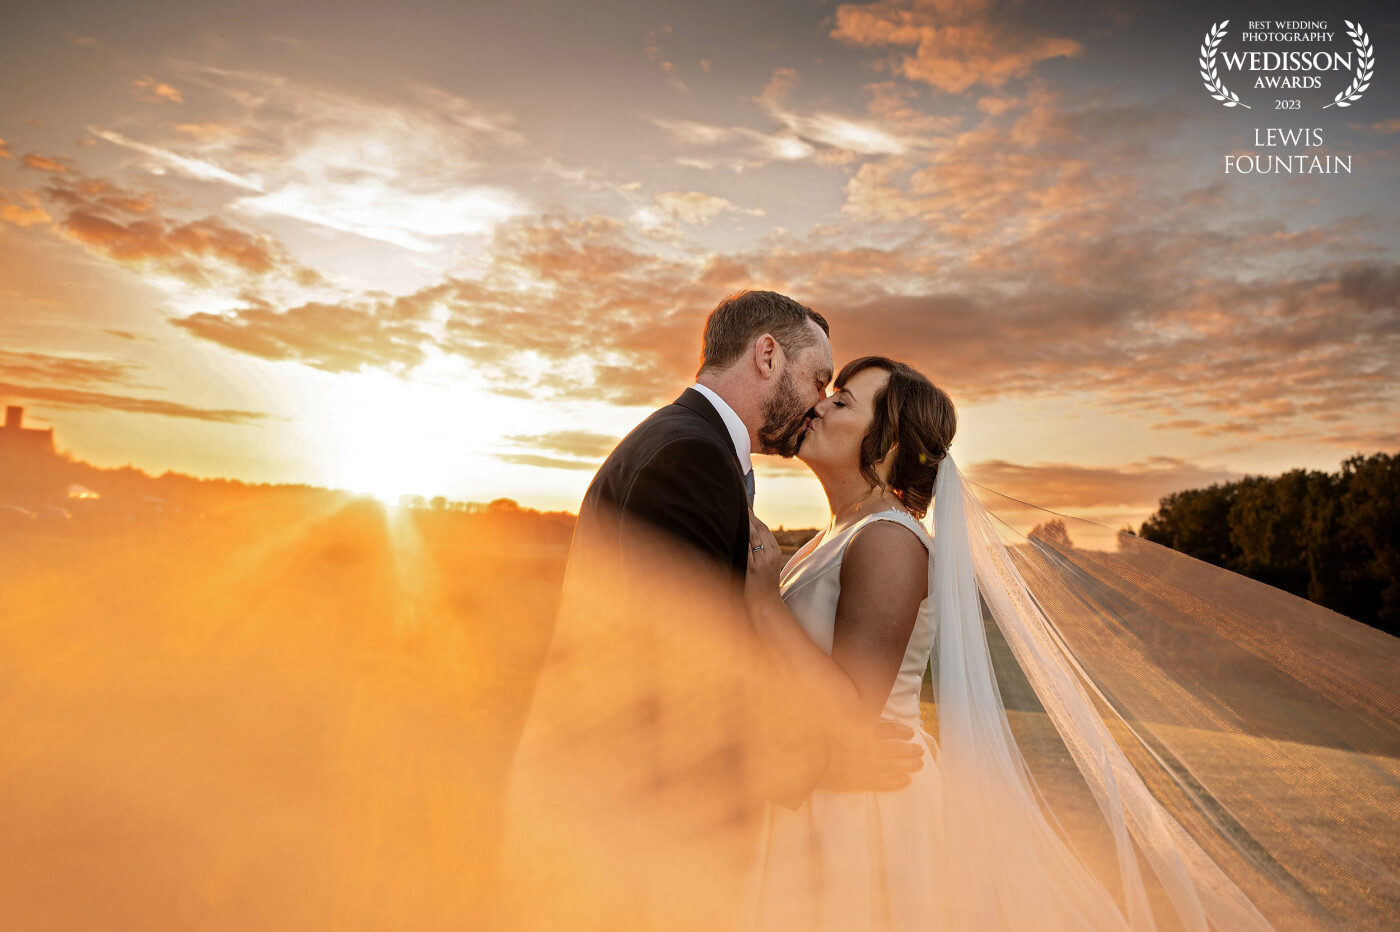 When you have a great sunset, a cathedral veil, and a couple in love, you can get a beautiful shot to end an album 😊